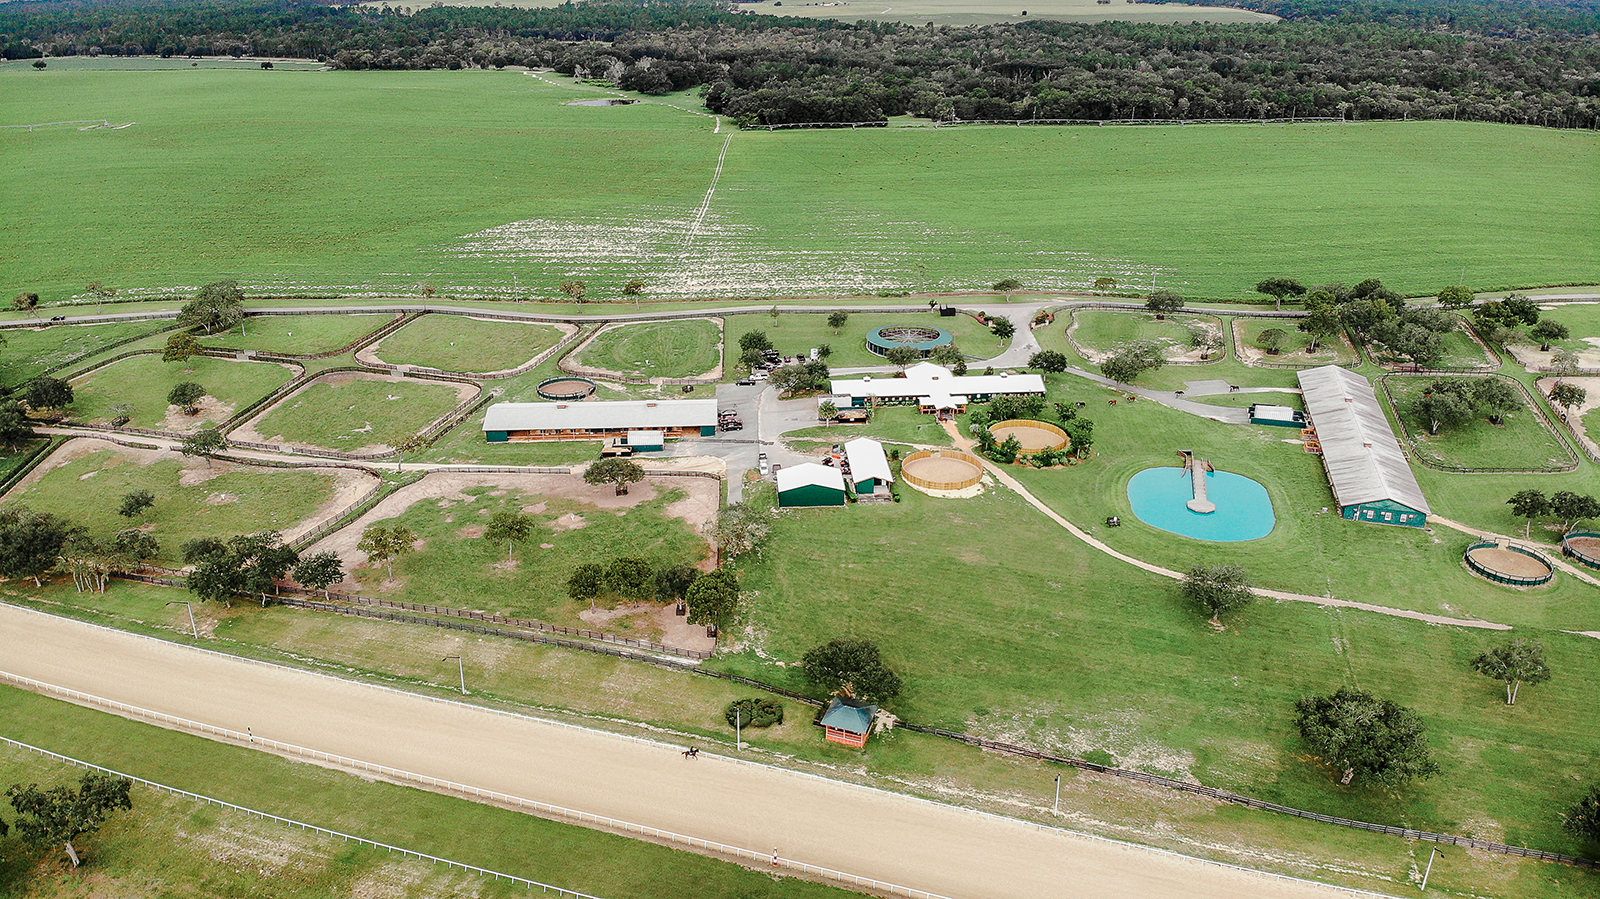 aerial view of barns and training amenities at oak ridge training center